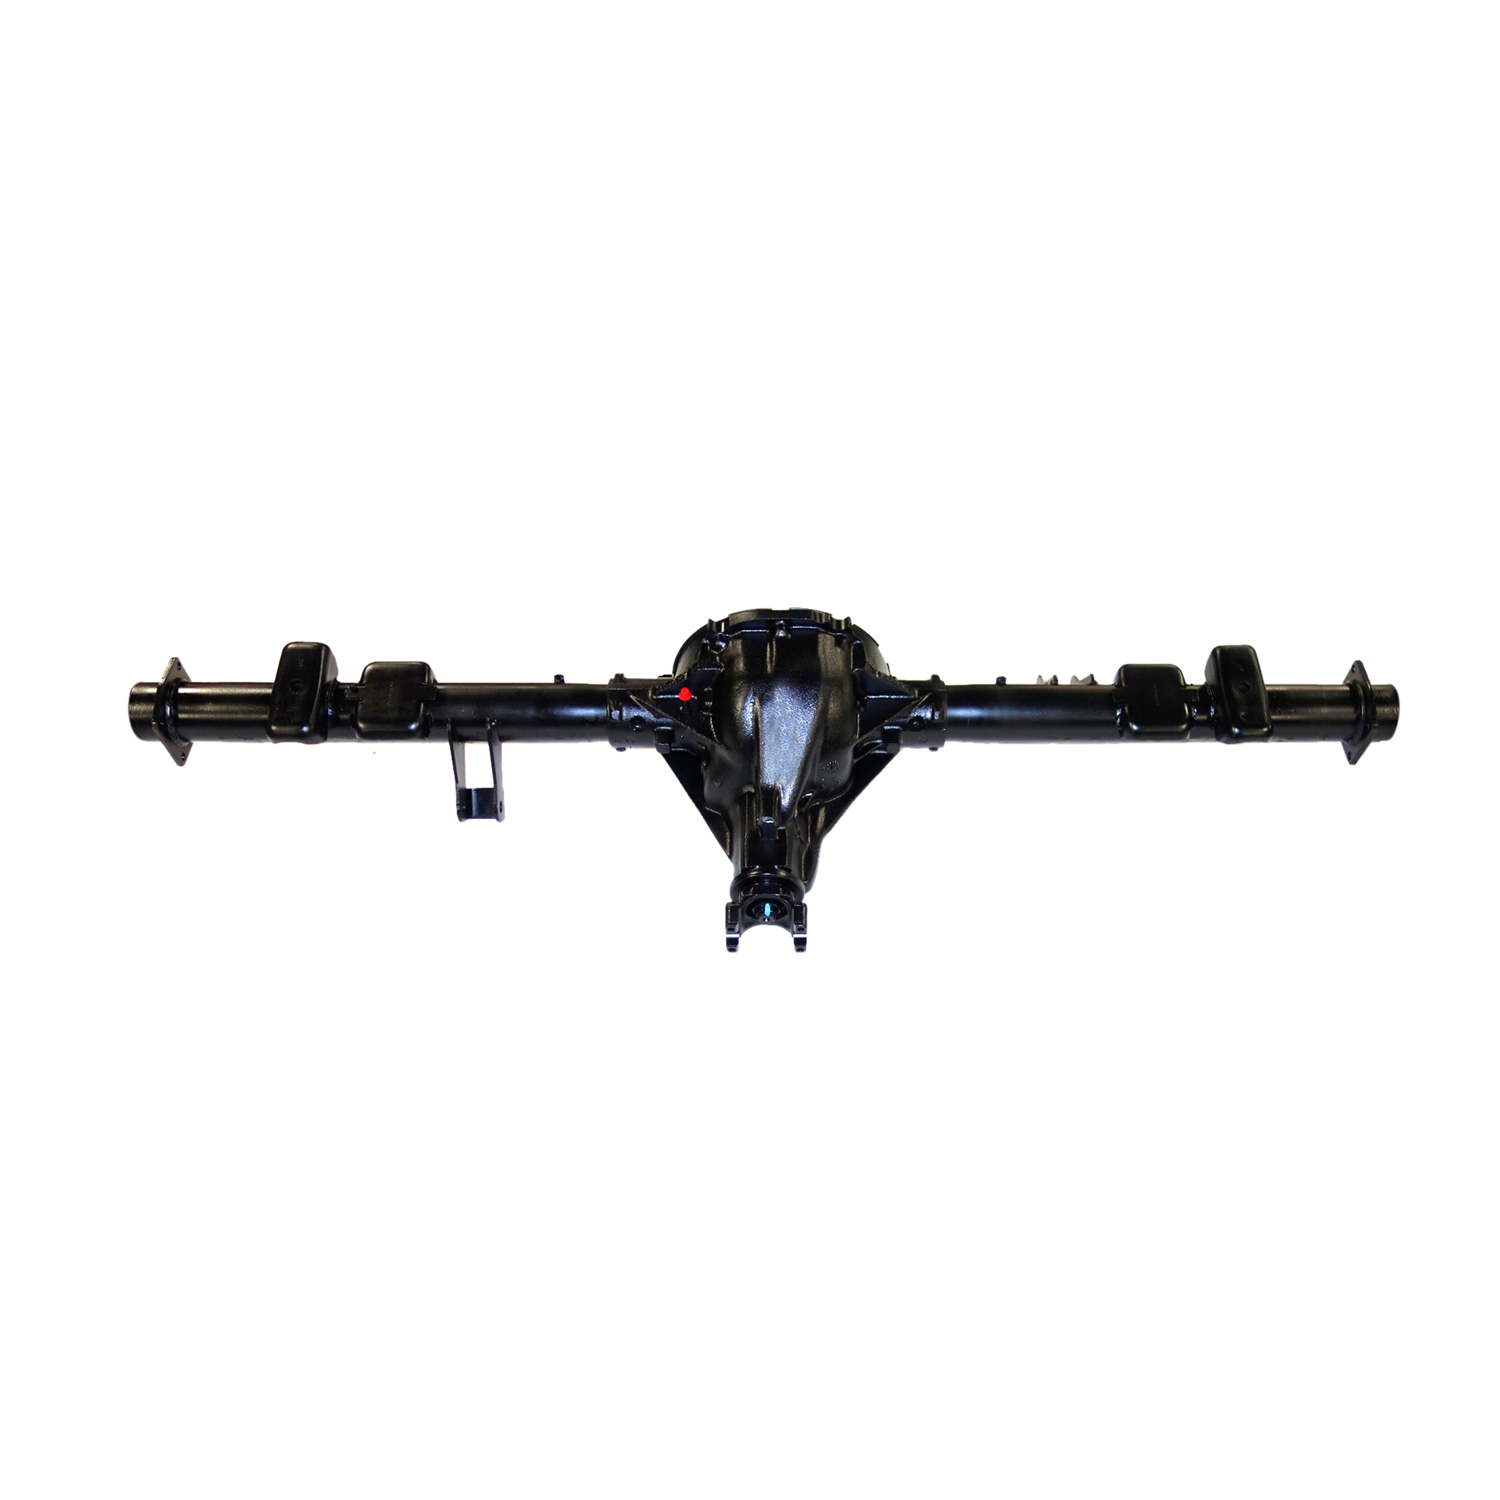 Remanufactured Axle Assy for GM 8.5" 1995 Chevy Tahoe & GMC Yukon 3.42 , 2wd, 2dr